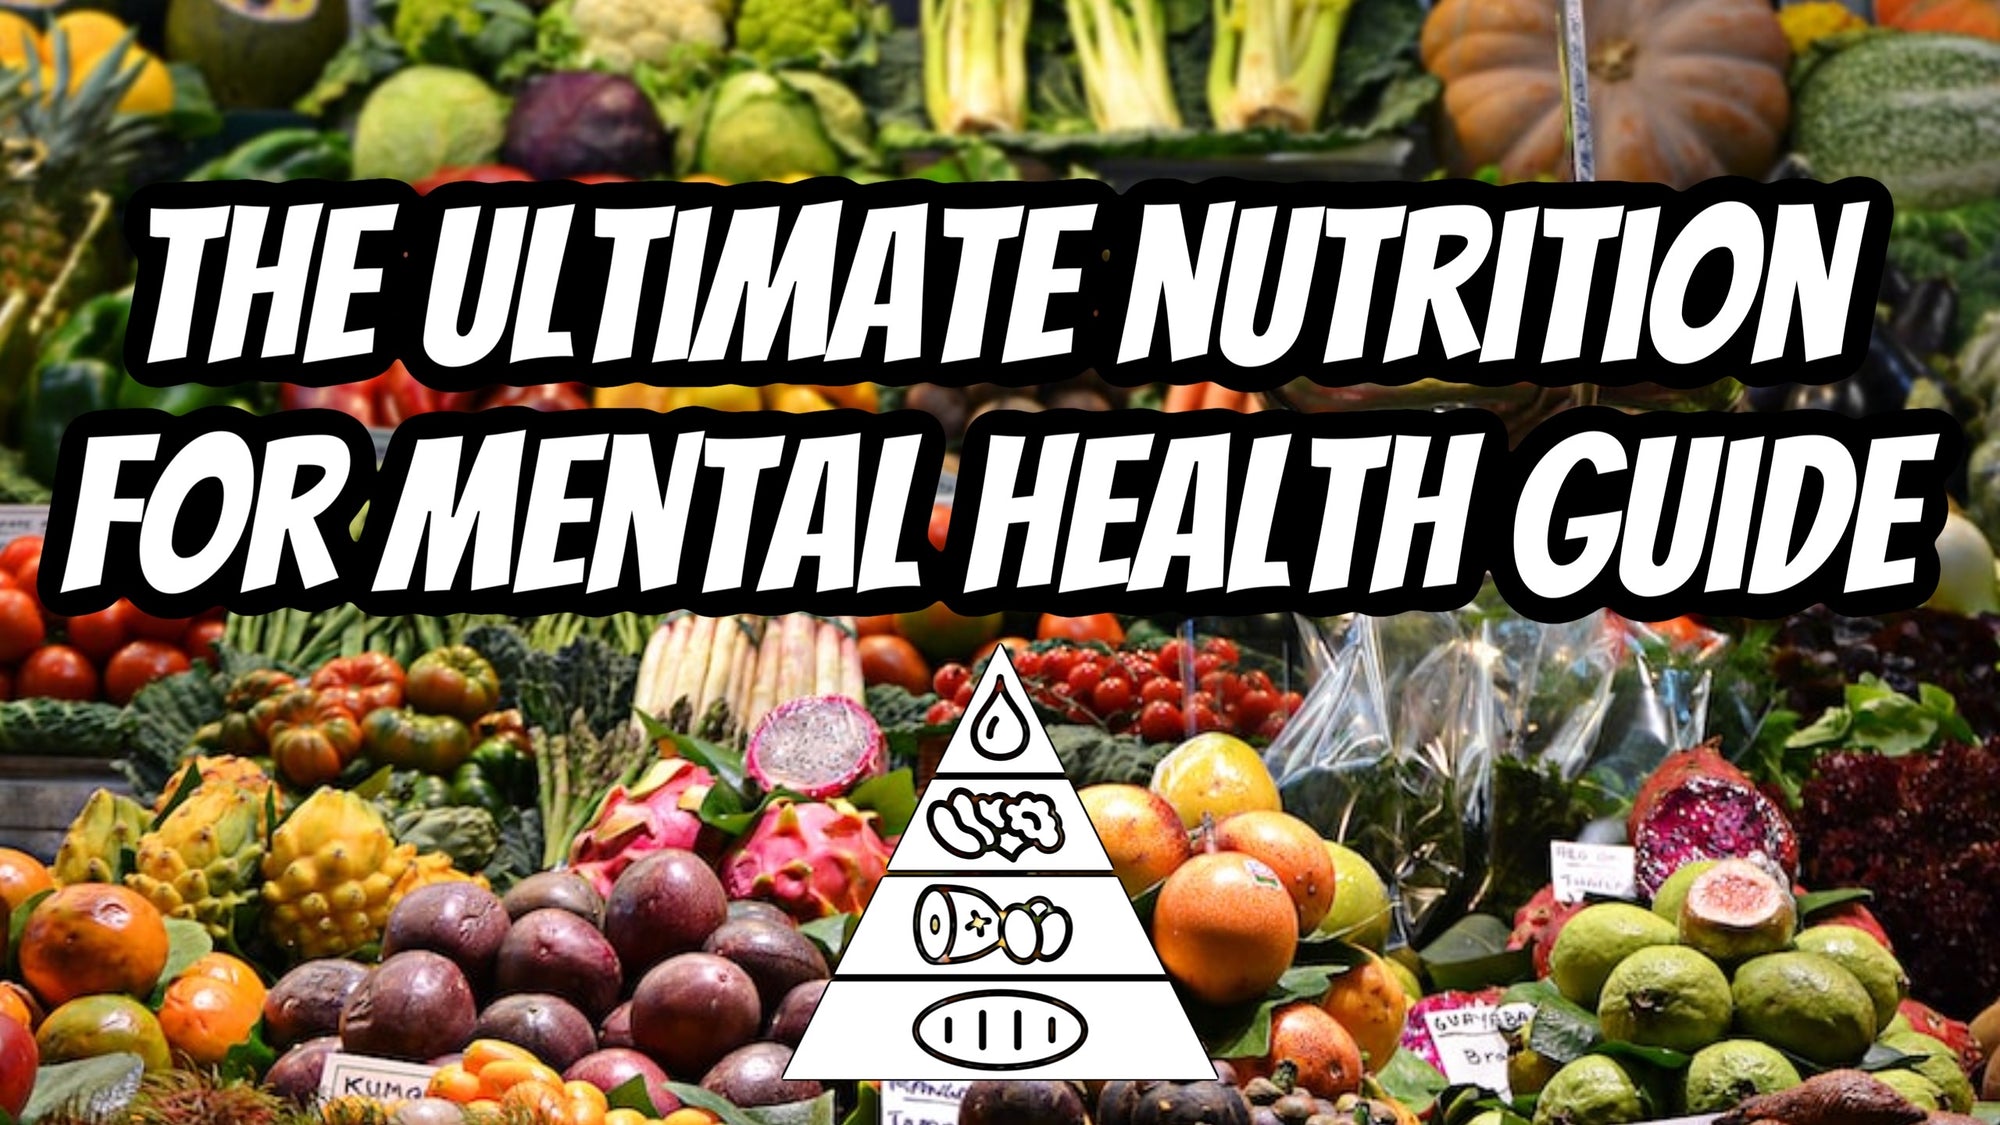 The Ultimate Nutrition For Mental Health Guide